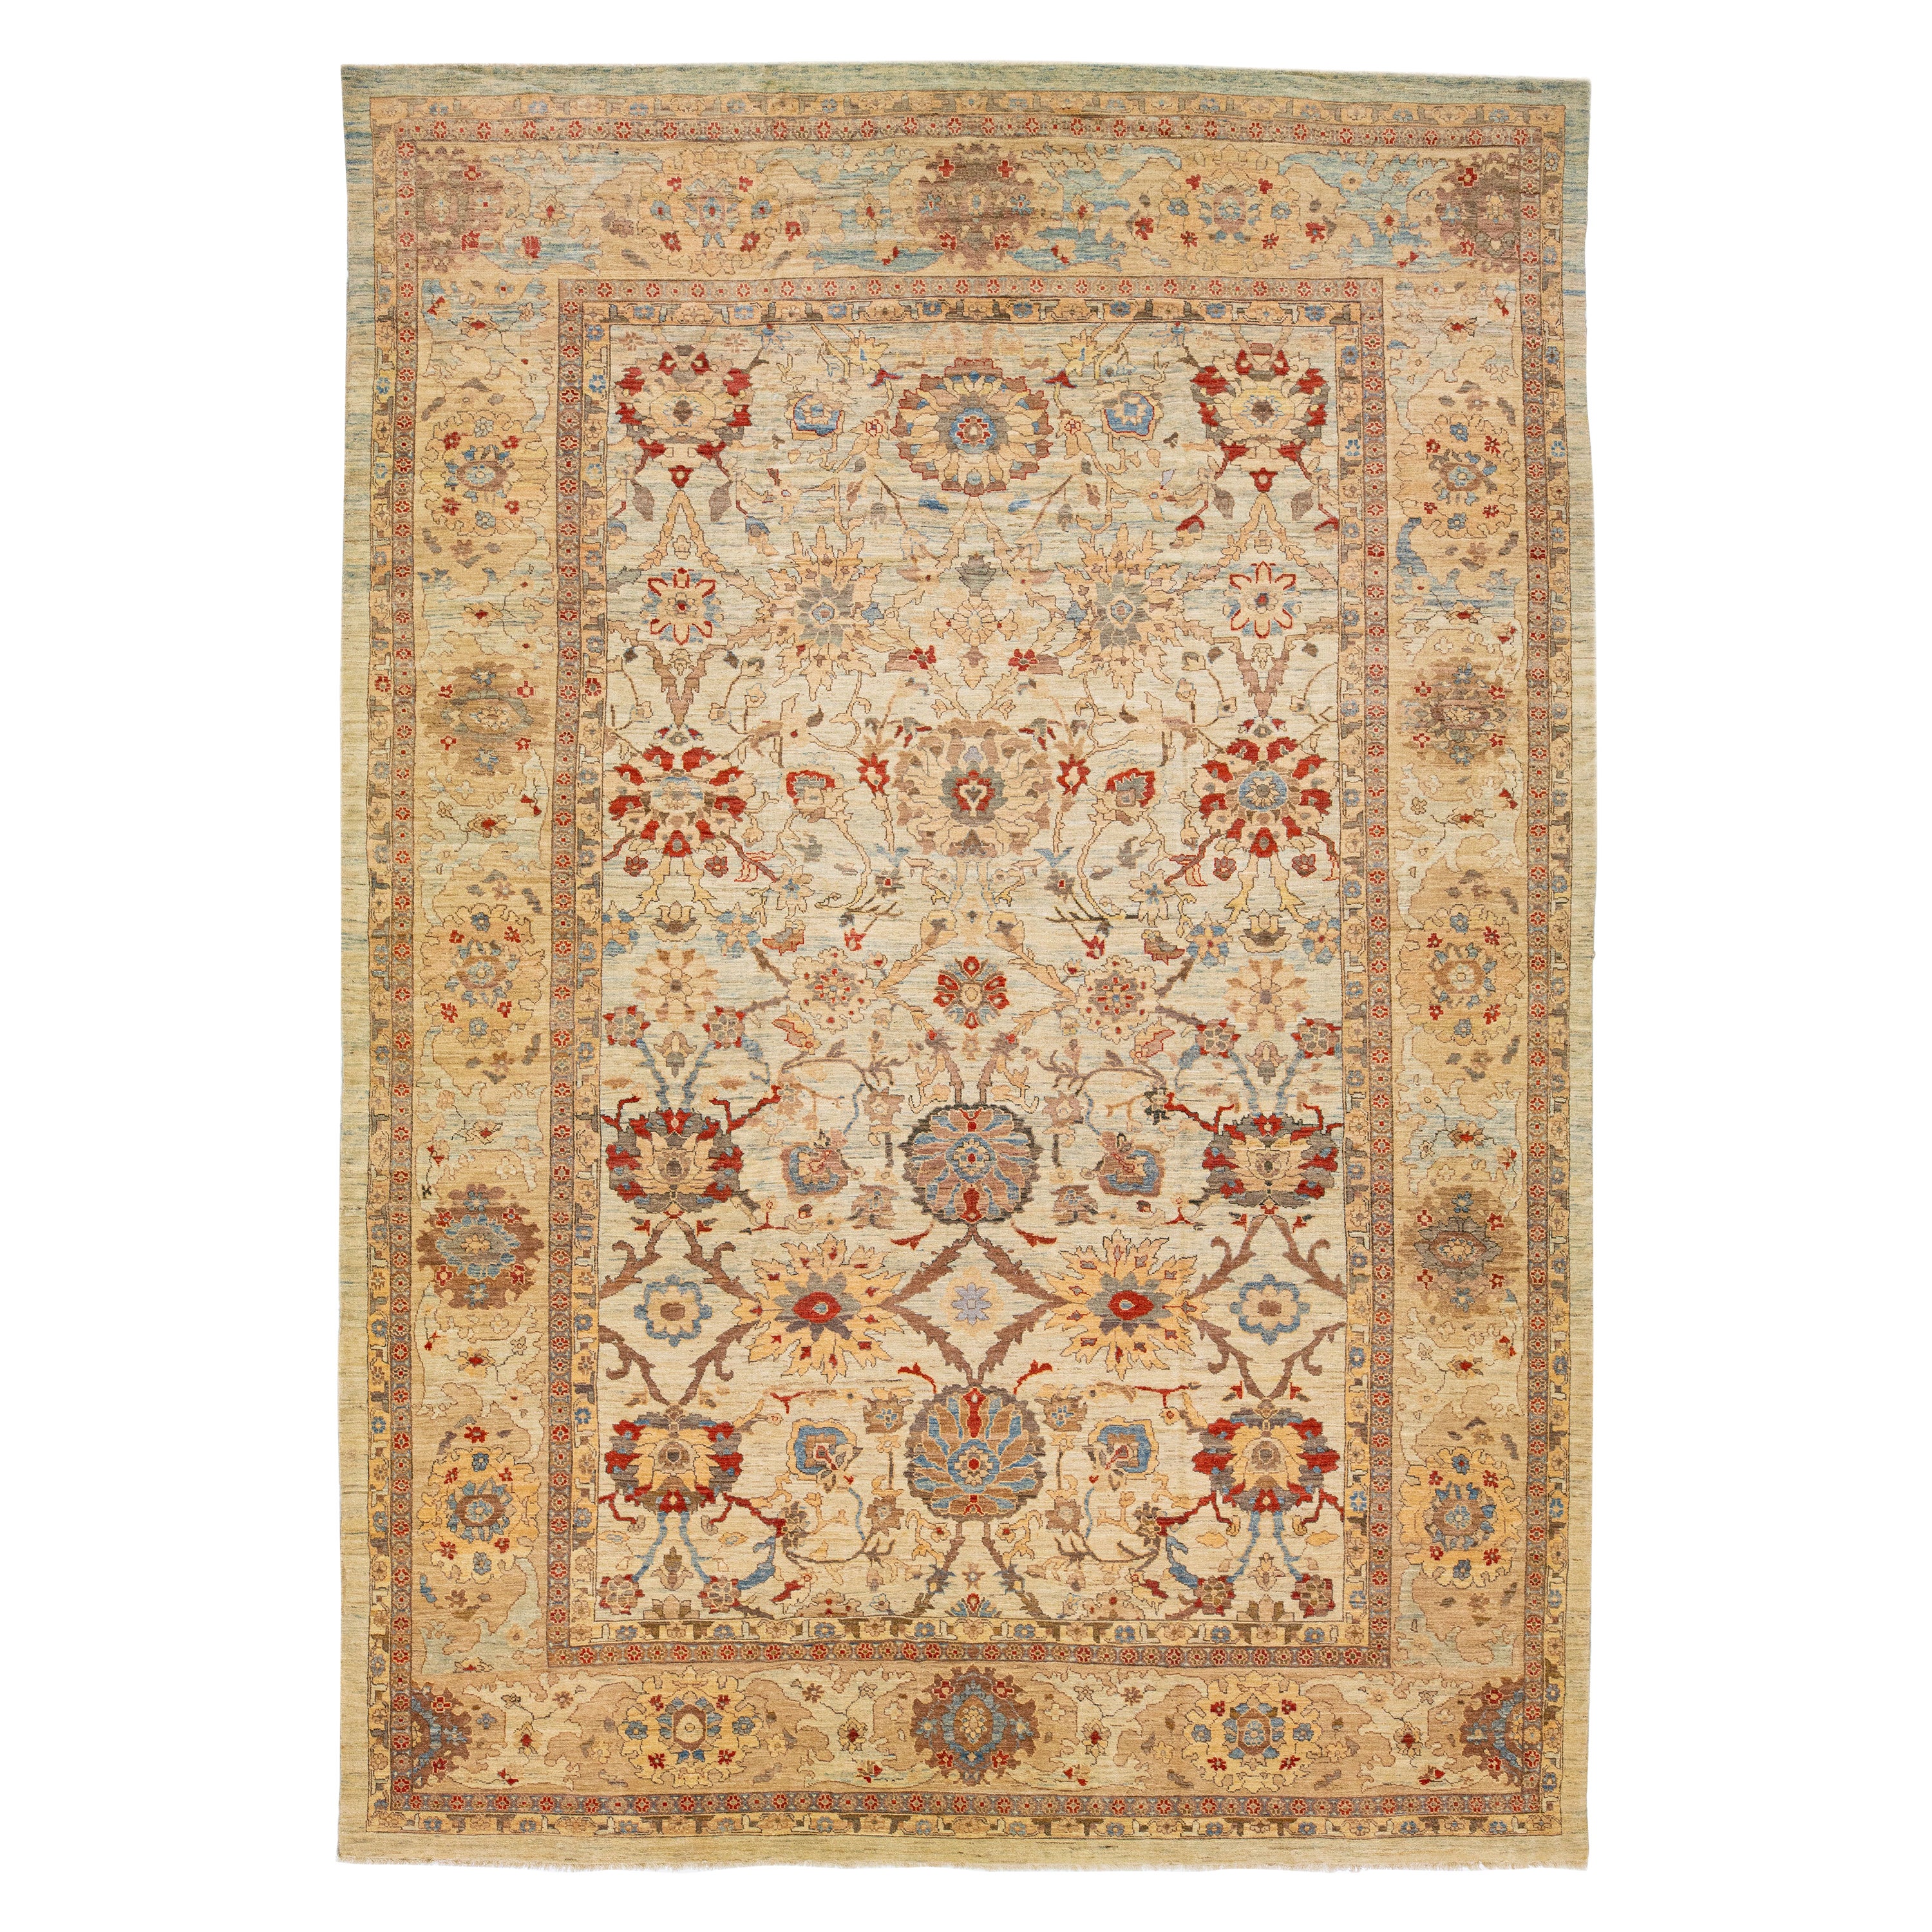 Oversize Modern Sultanabad Wool Rug Handmade with Floral Motif in Light Blue